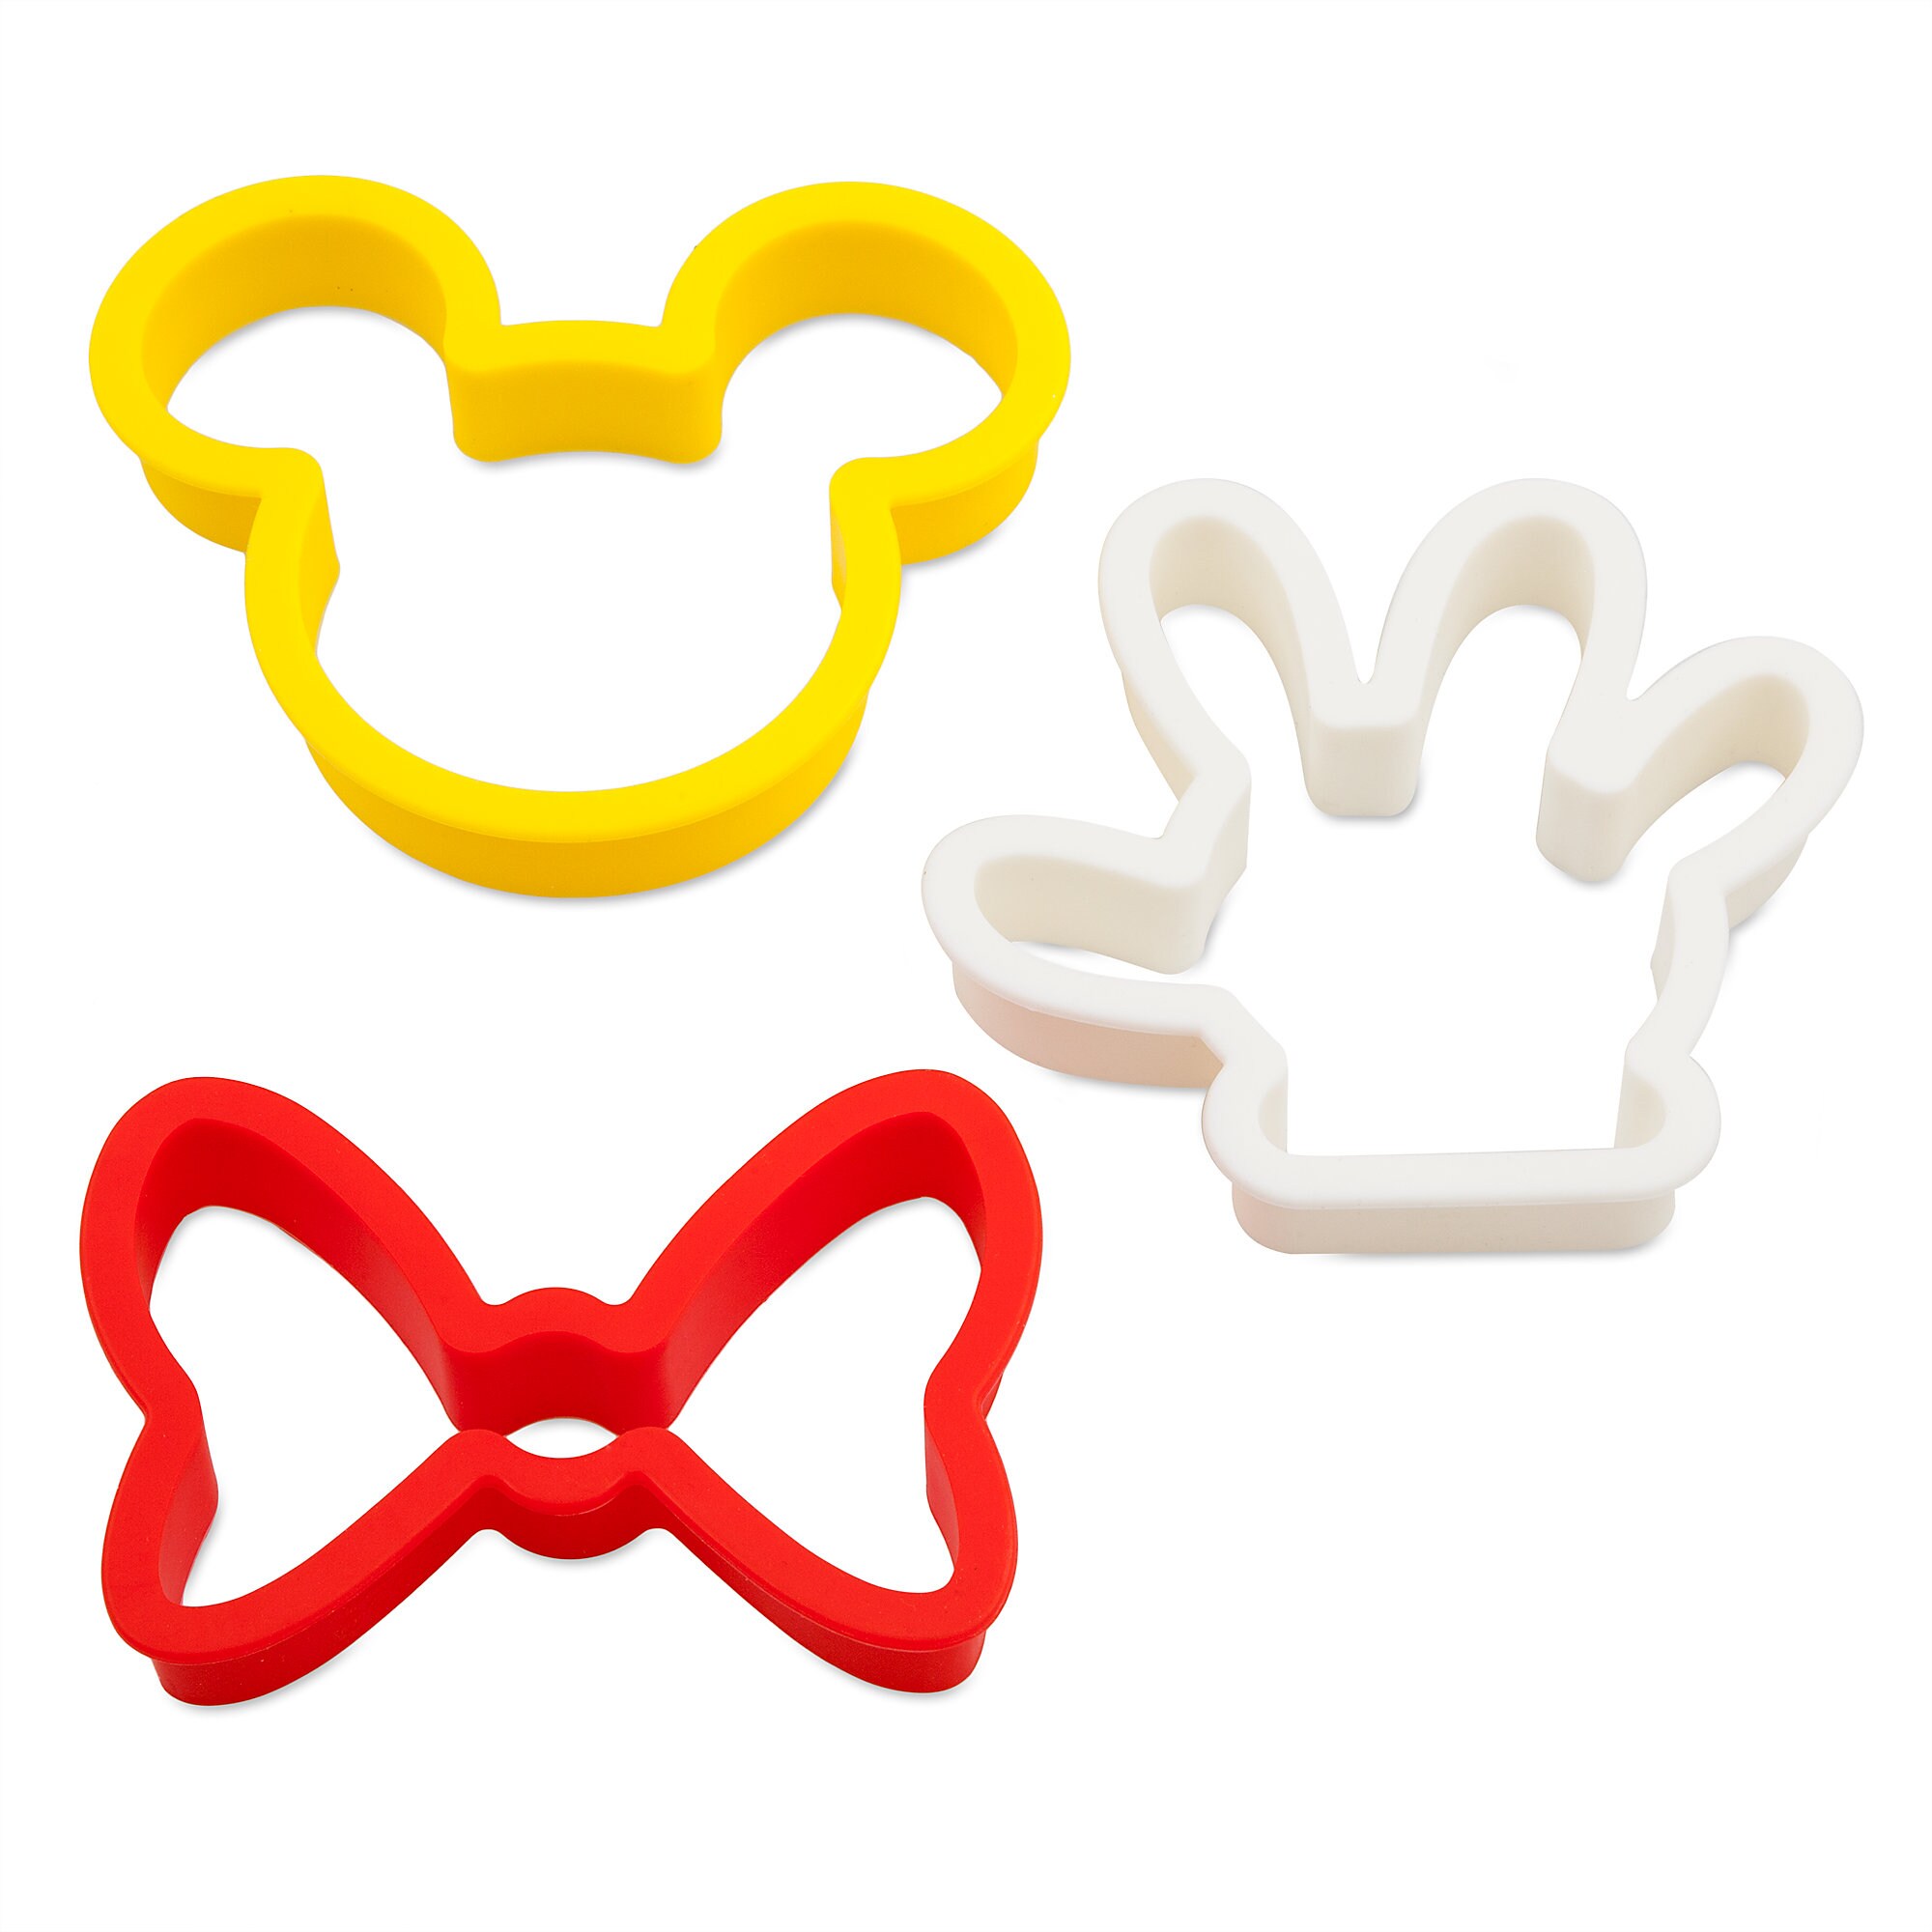 Mickey and Minnie Mouse Breakfast Mold Set - Disney Eats